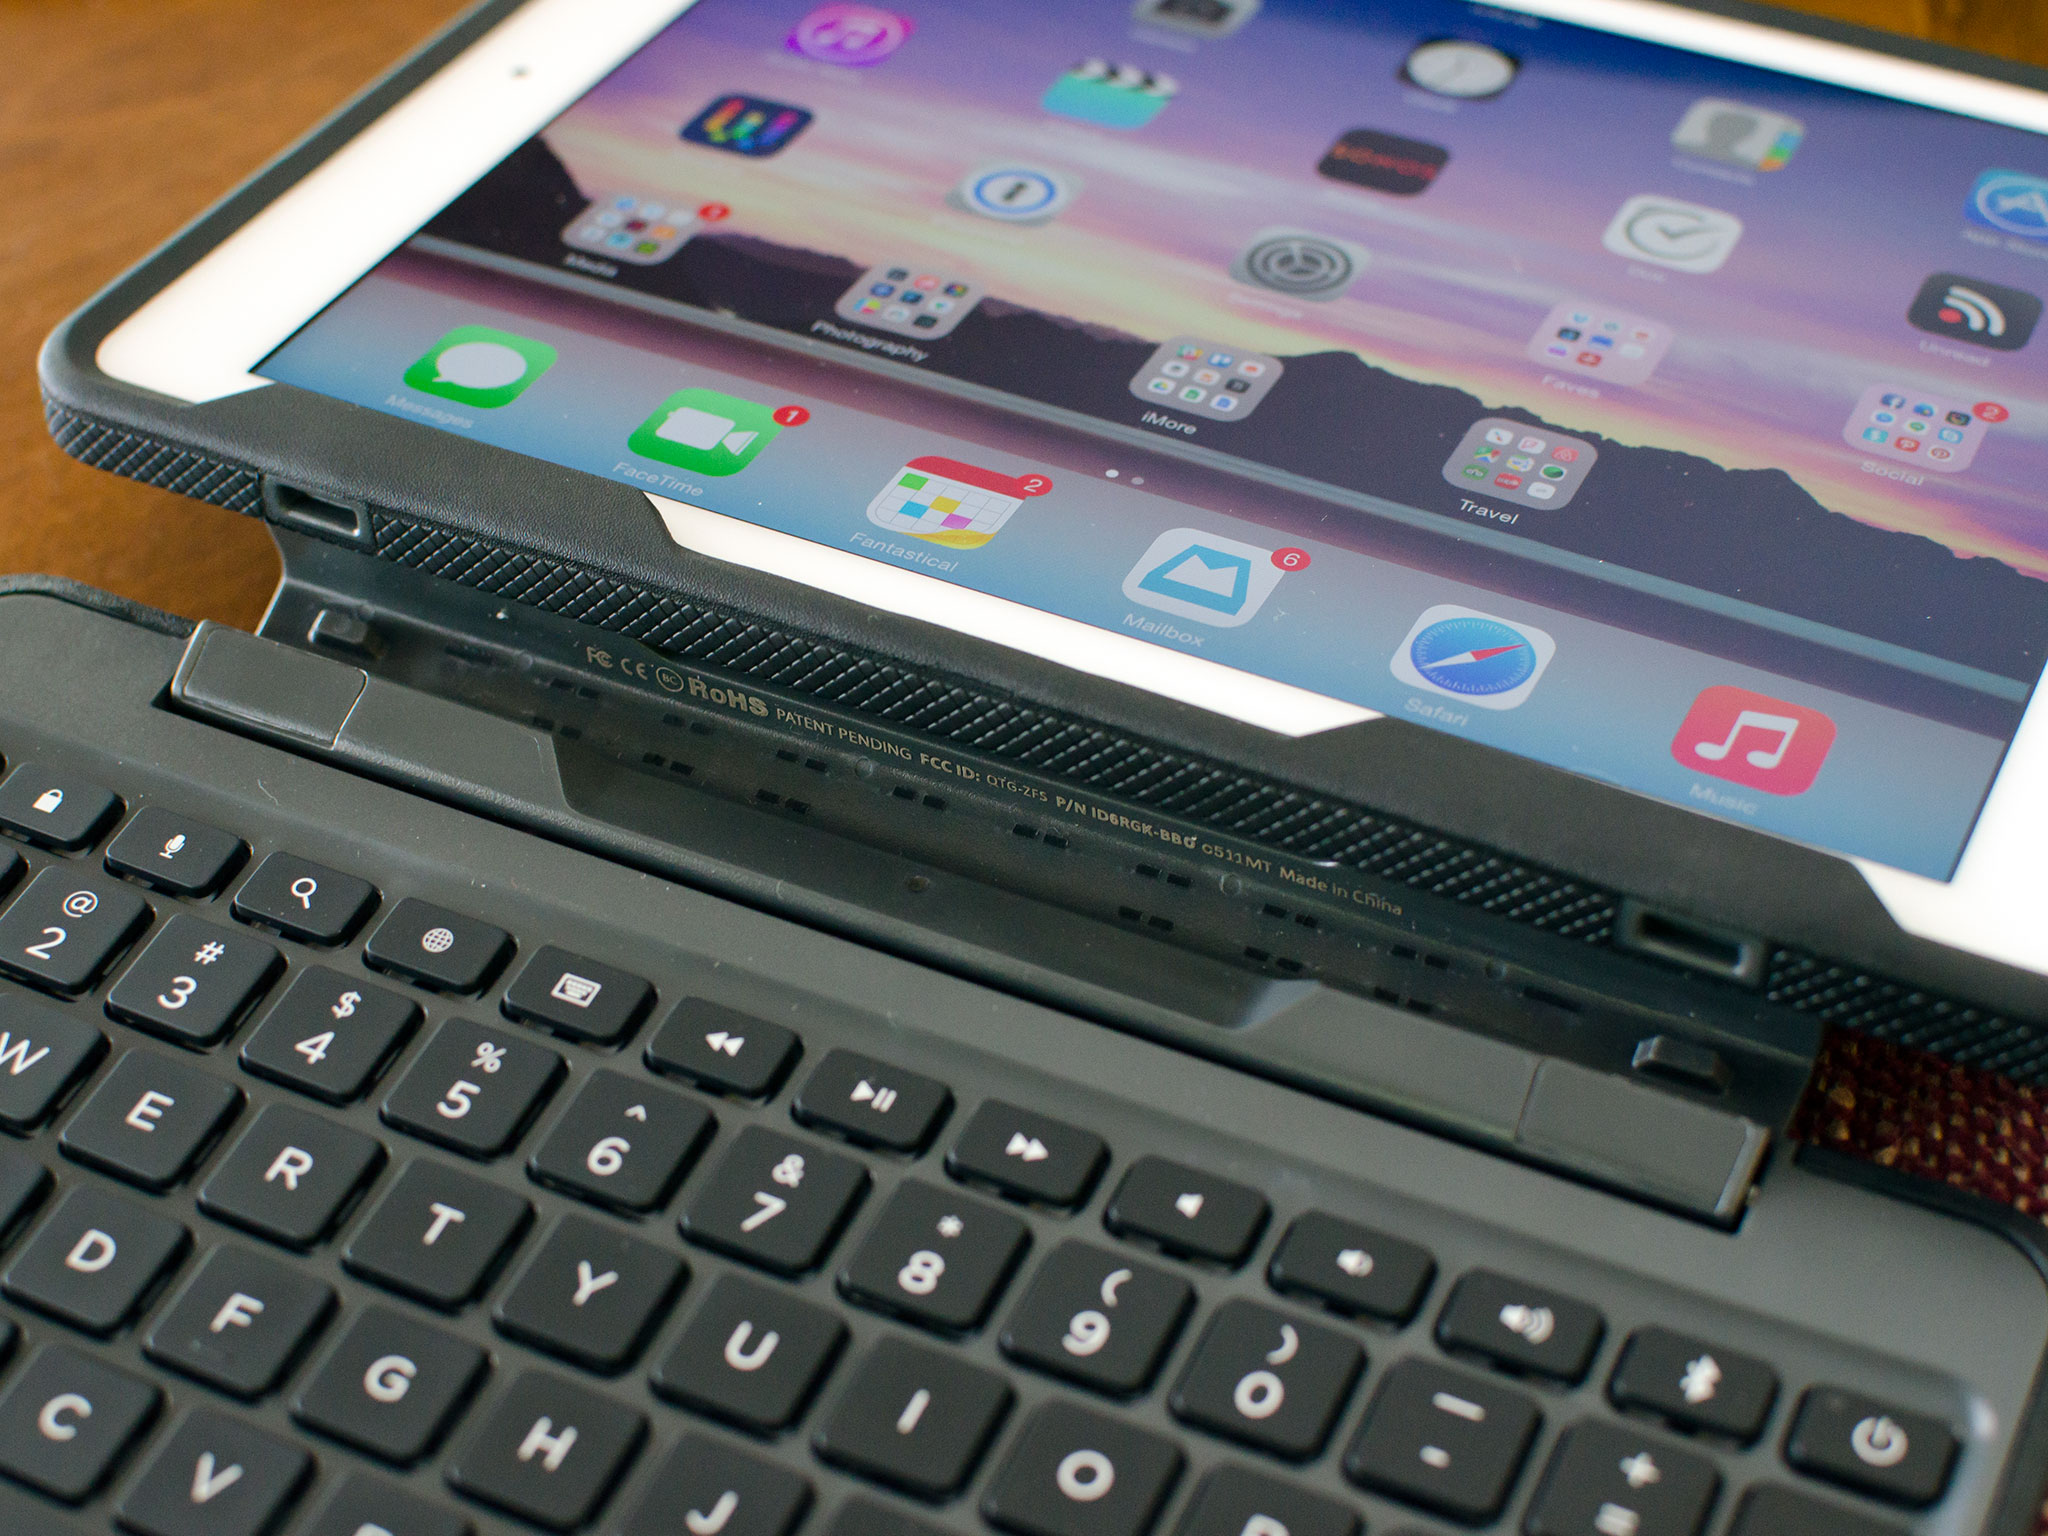 Zagg Rugged Book keyboard case for iPad Air 2 review